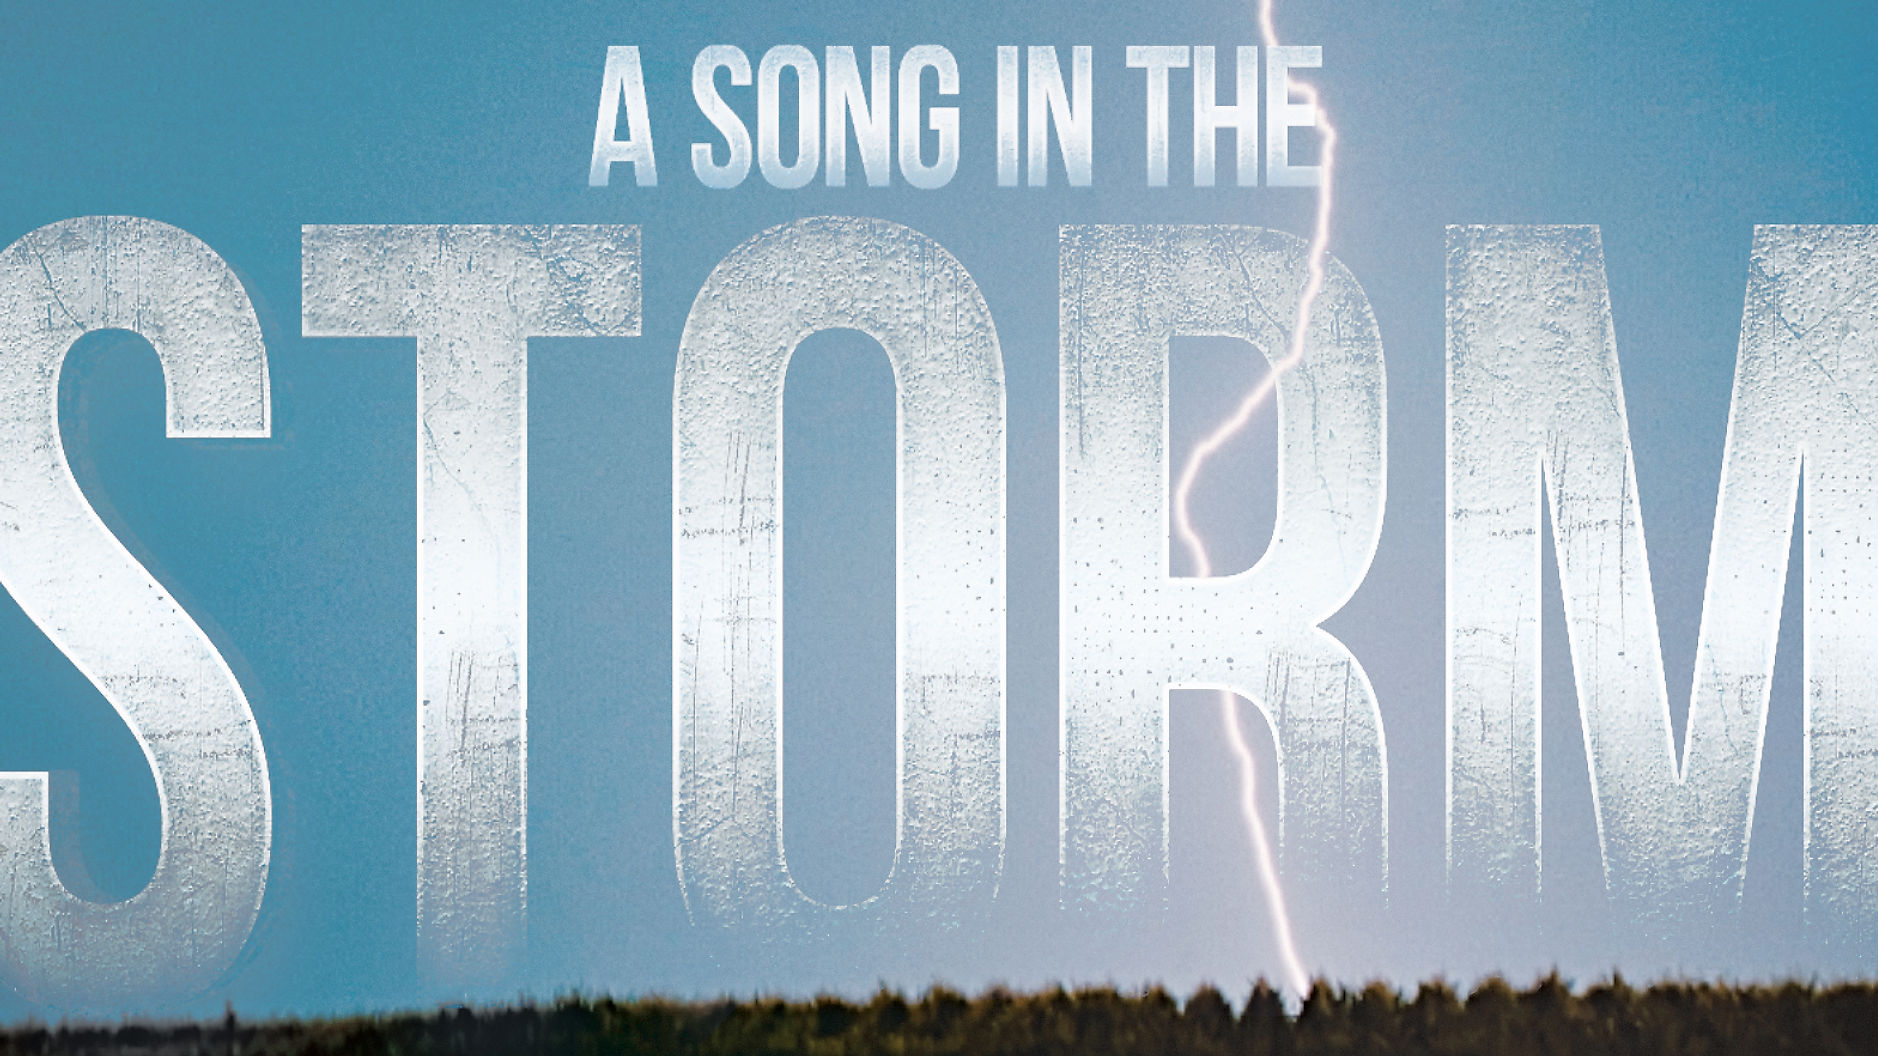 "A SONG IN THE STORM"